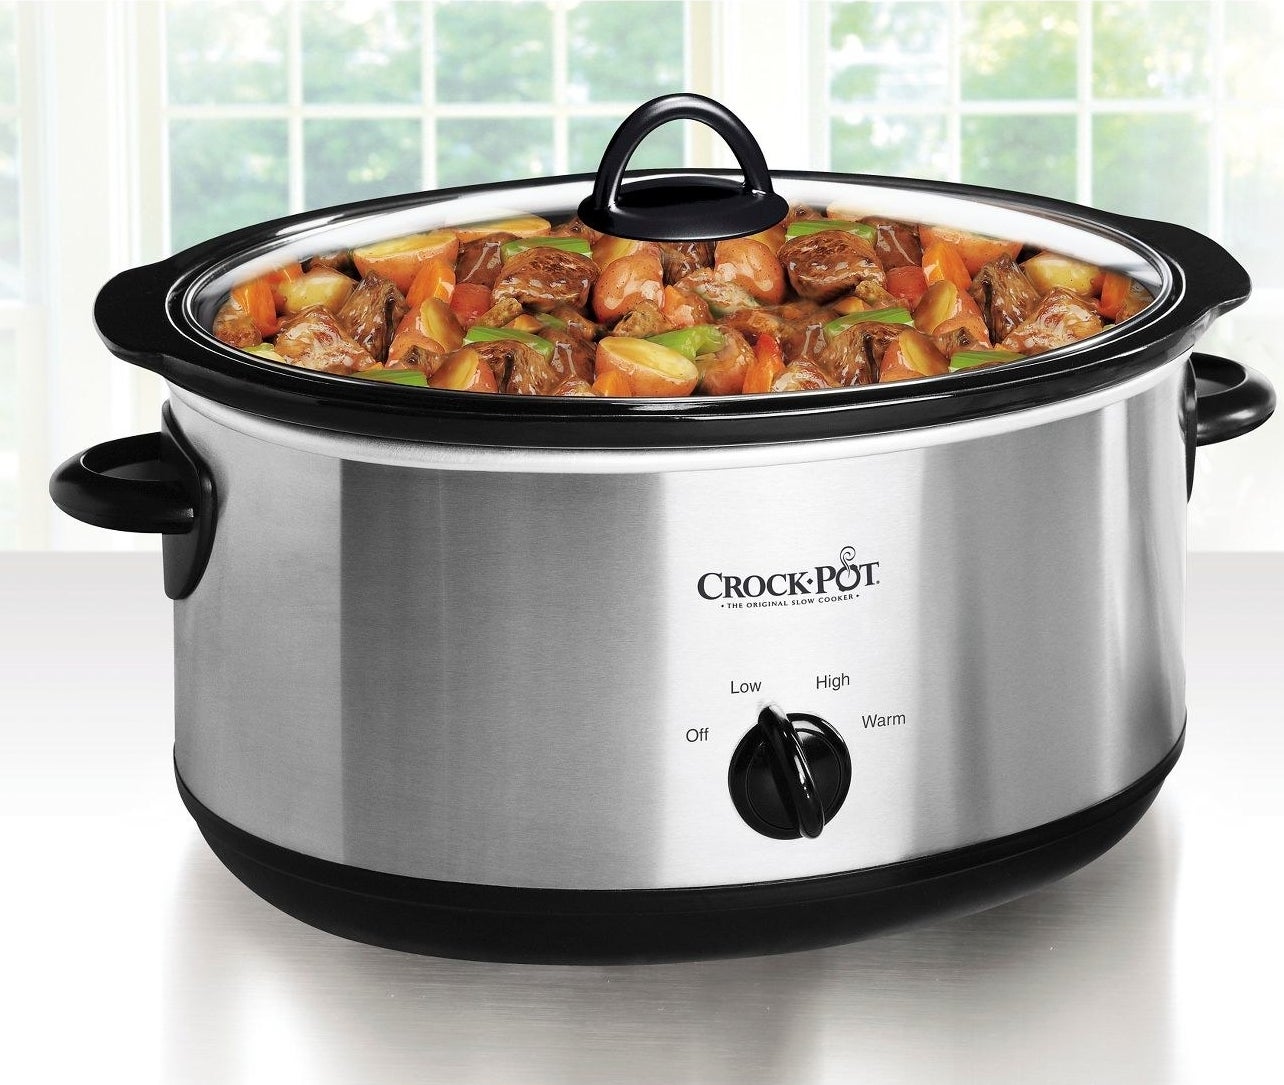 sliver crockpot cooking a stew while on a kitchen counter